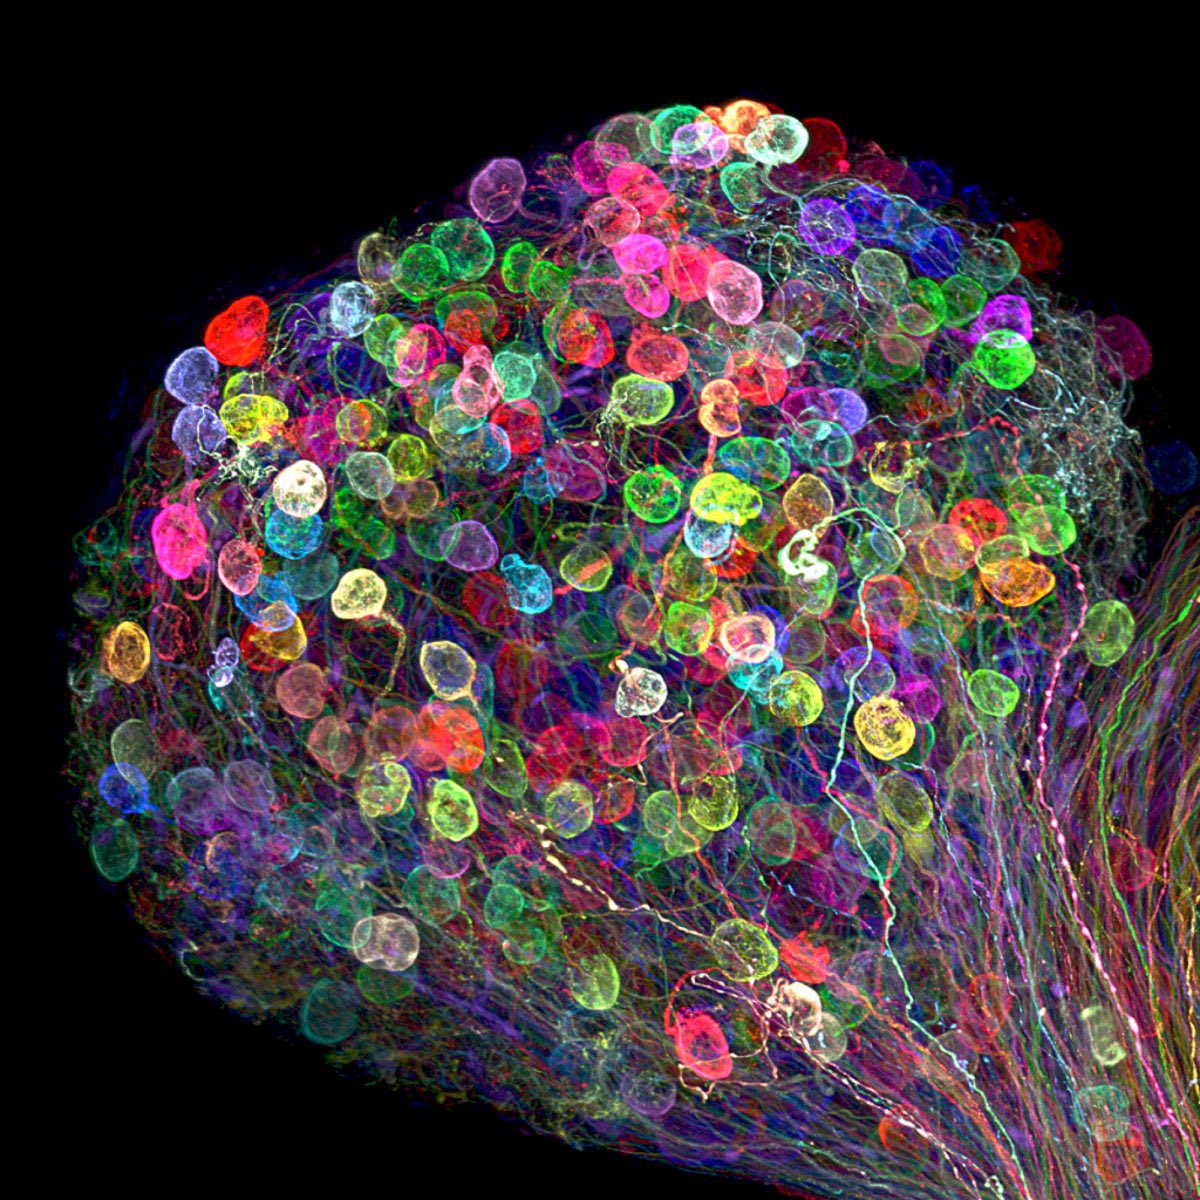 Microphotography unveils the hidden beauty of the microscopic world, revealing intricate details that amaze the mind. The wonders of science and technology never cease to inspire.

This part of an embryonic chick brain is coloured with the 'brainbow' genetic technique: